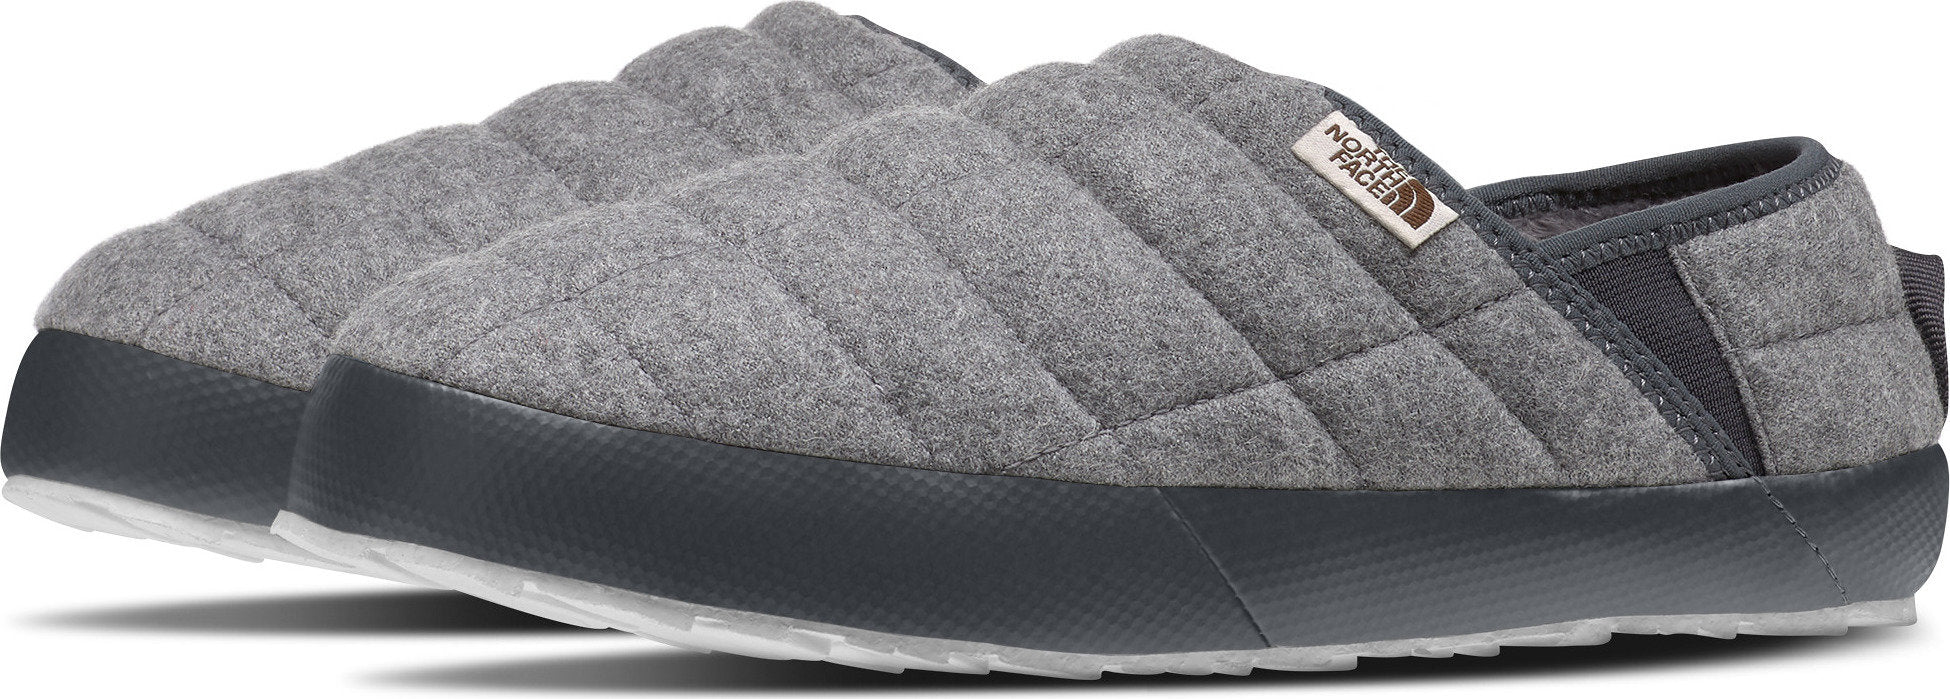 north face traction mule womens